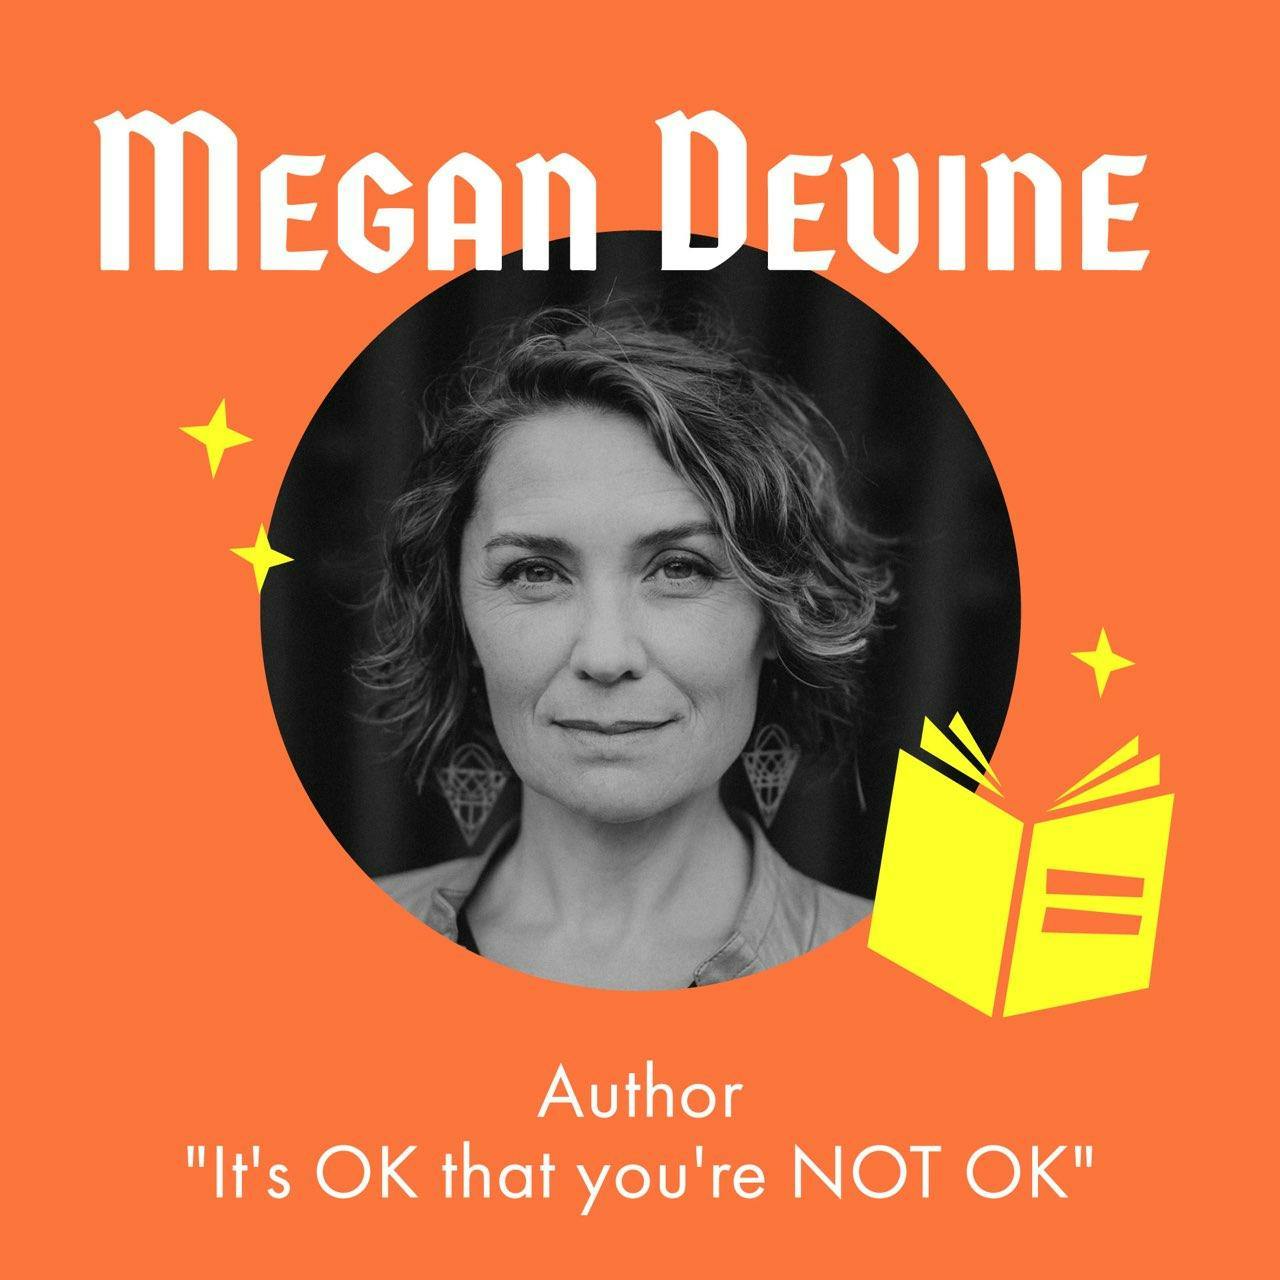 Rare Disease and Grief – Its Ok That You're Not Ok with Megan Devine